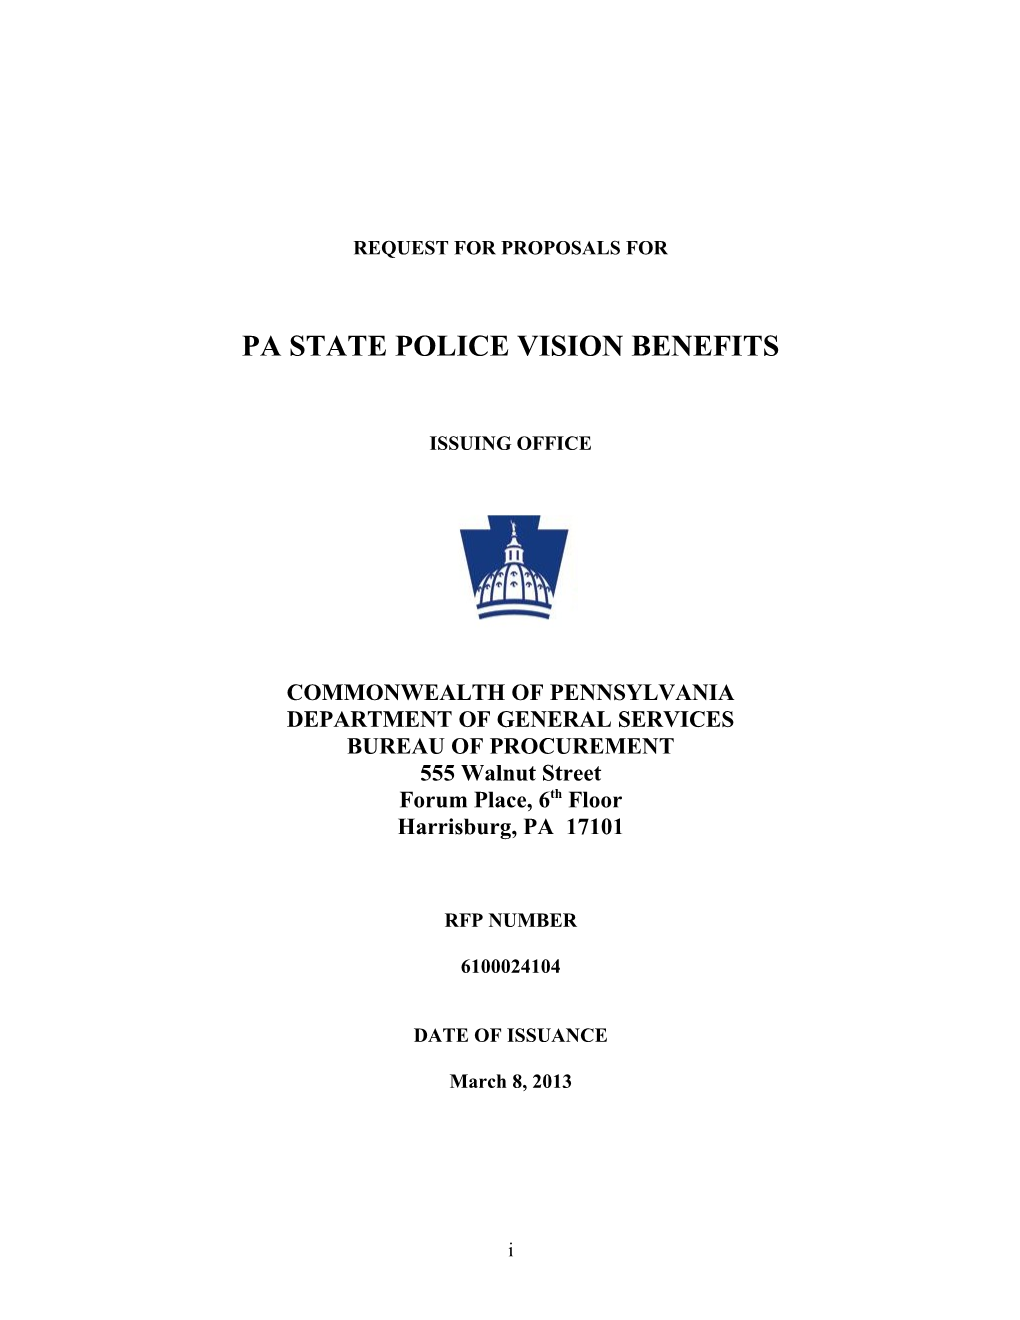 Pa State Police Vision Benefits